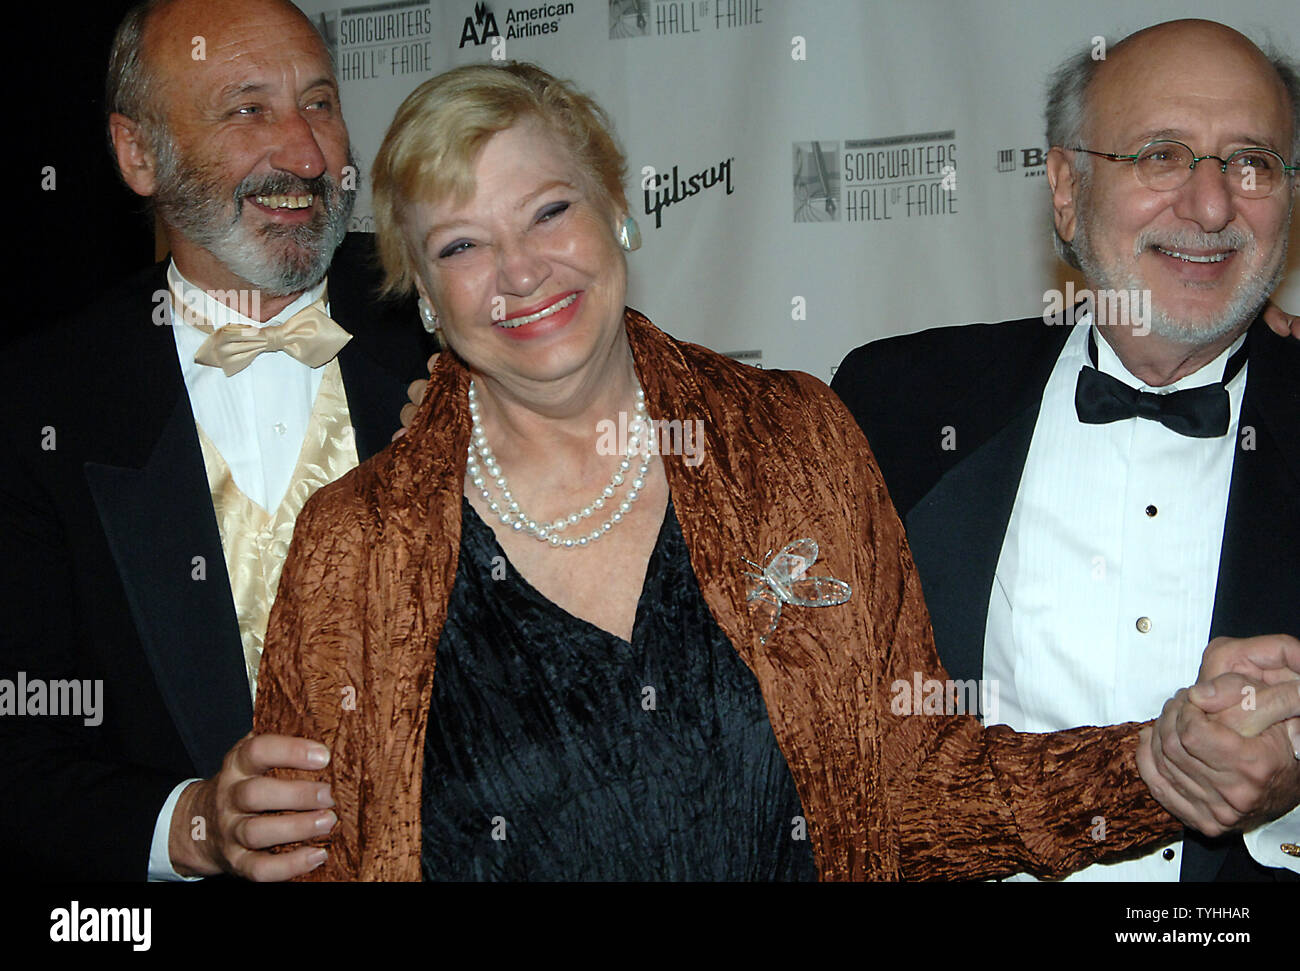 Peter, Paul and Mary: Noel Paul Stookey, Mary Travers and Peter Yarrow (left to right), who received the Sammy Cahn Lifetime Achievement Award,  greet the media covering the 2006 Songwriters Hall of Fame ceremonies in New York City on June 15,2006. (UPI Photo/Ezio Petersen) Stock Photo